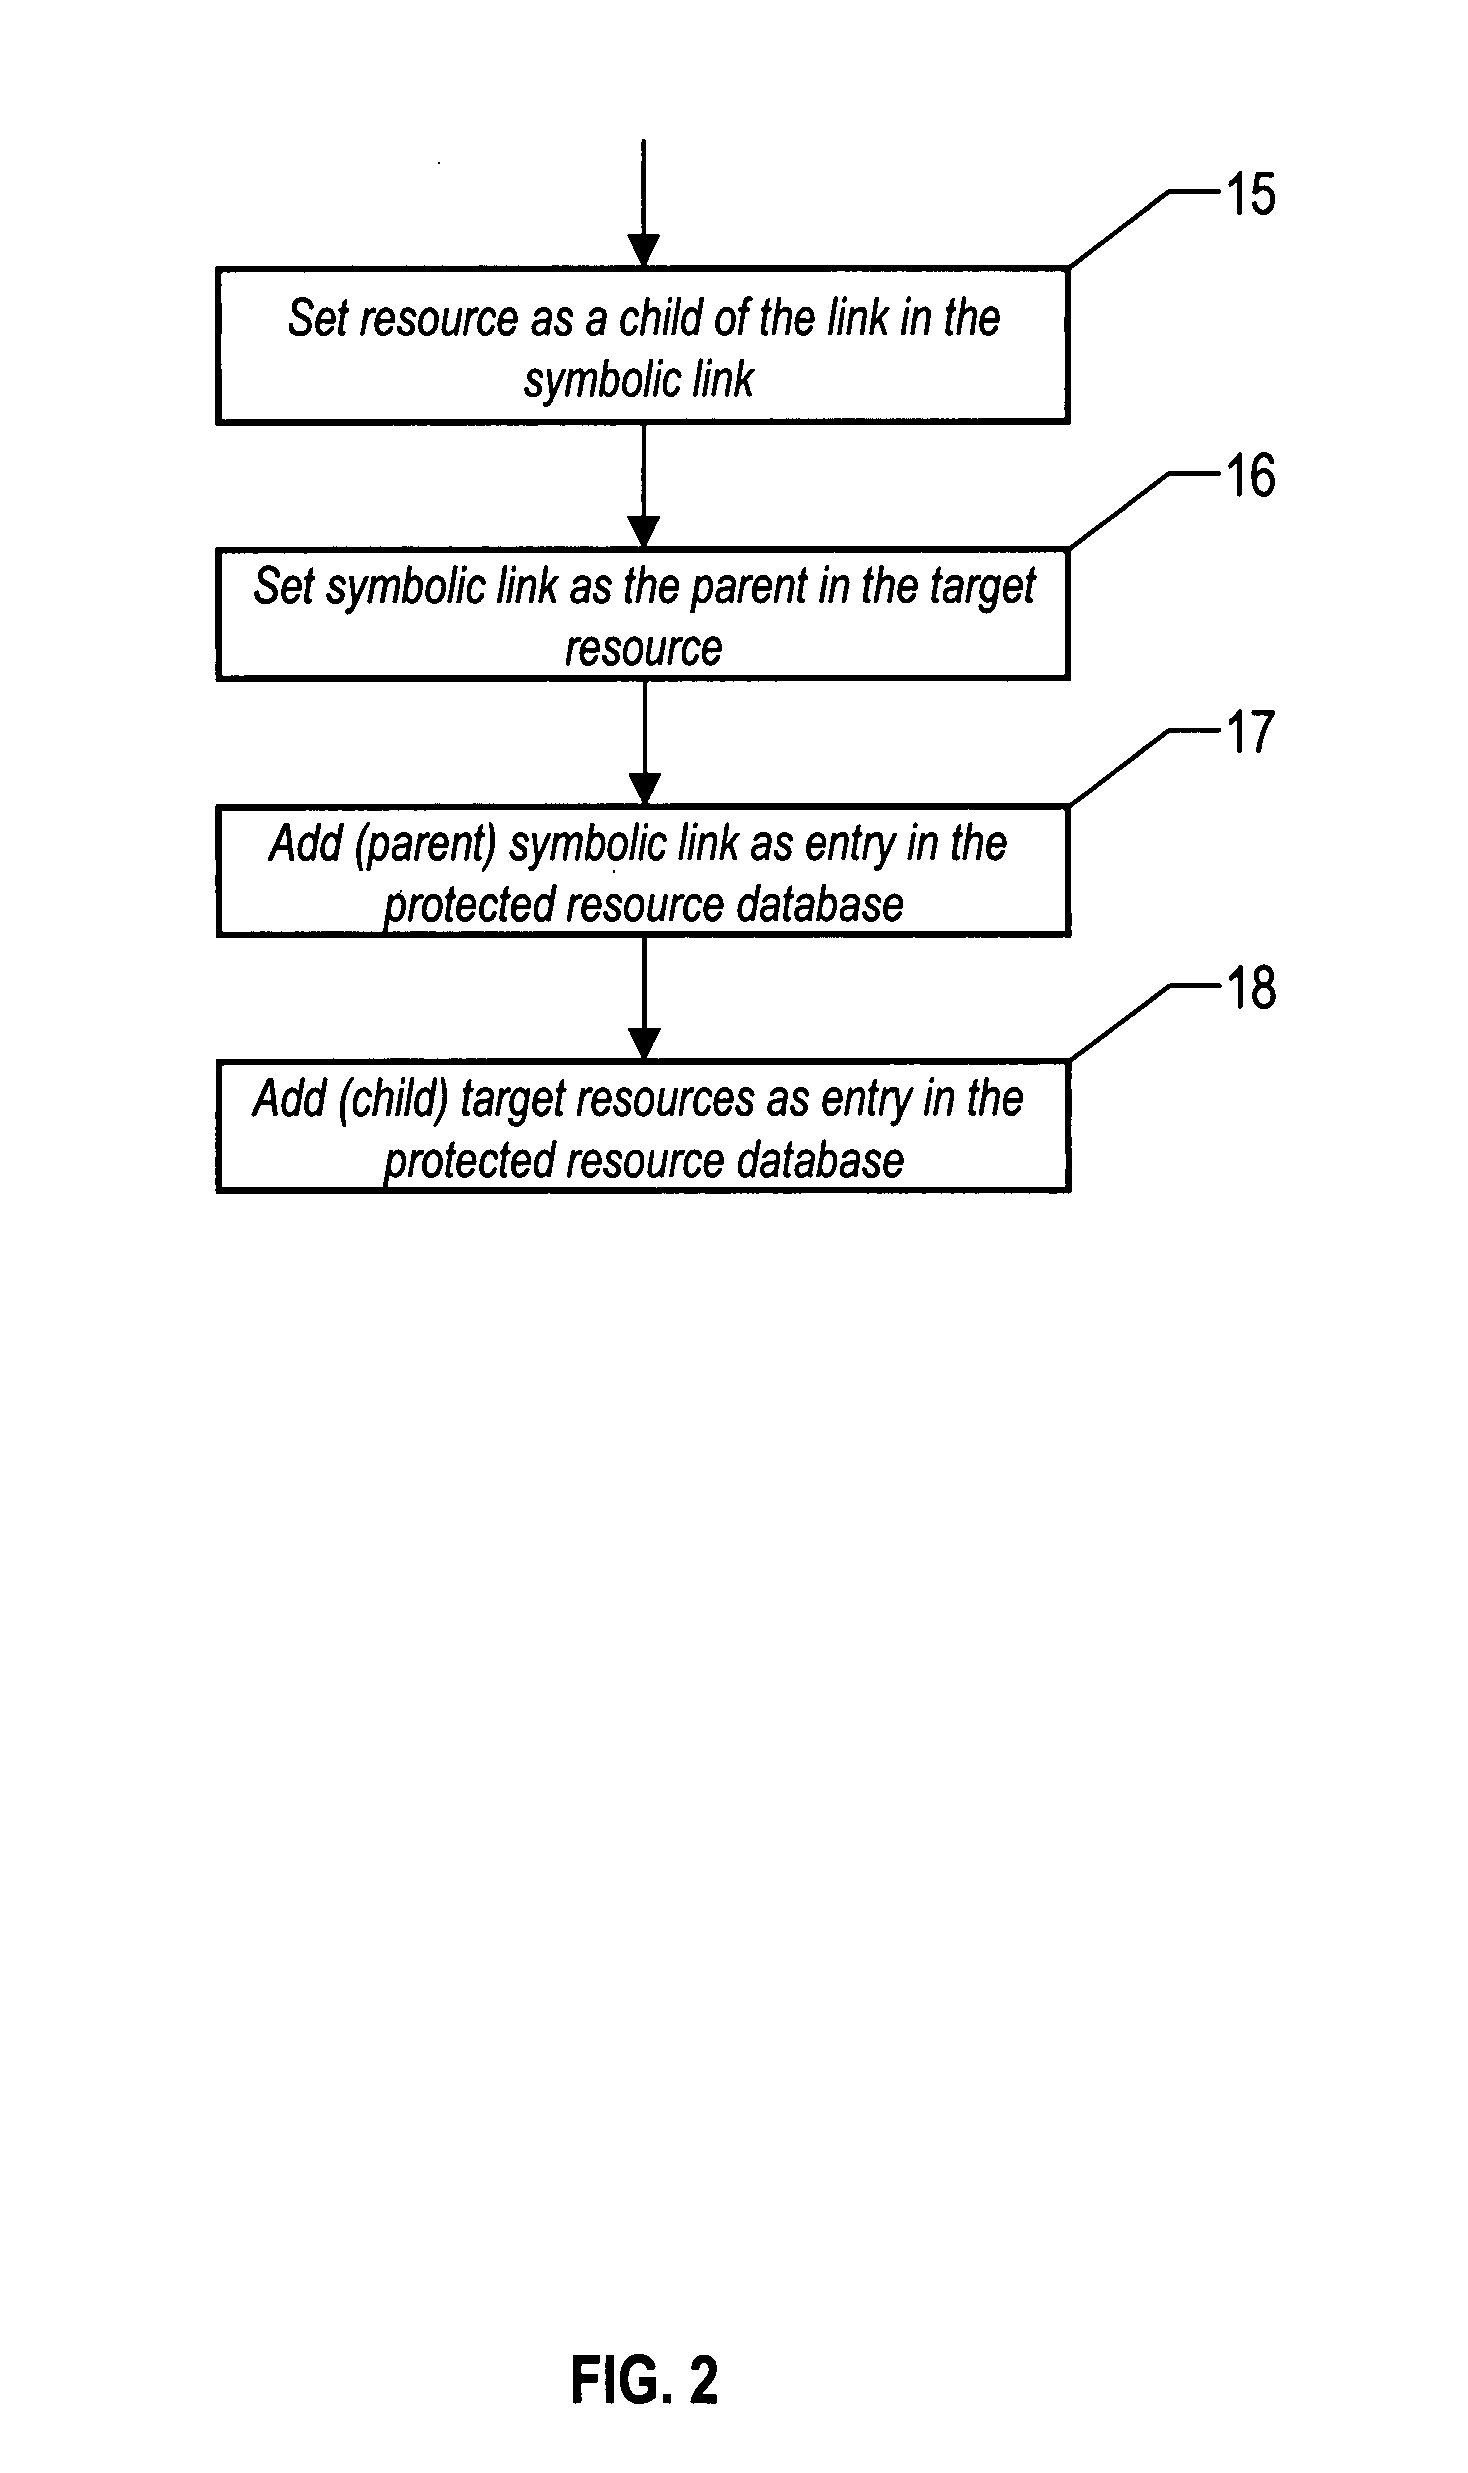 Method for adding external security to file system resources through symbolic link references